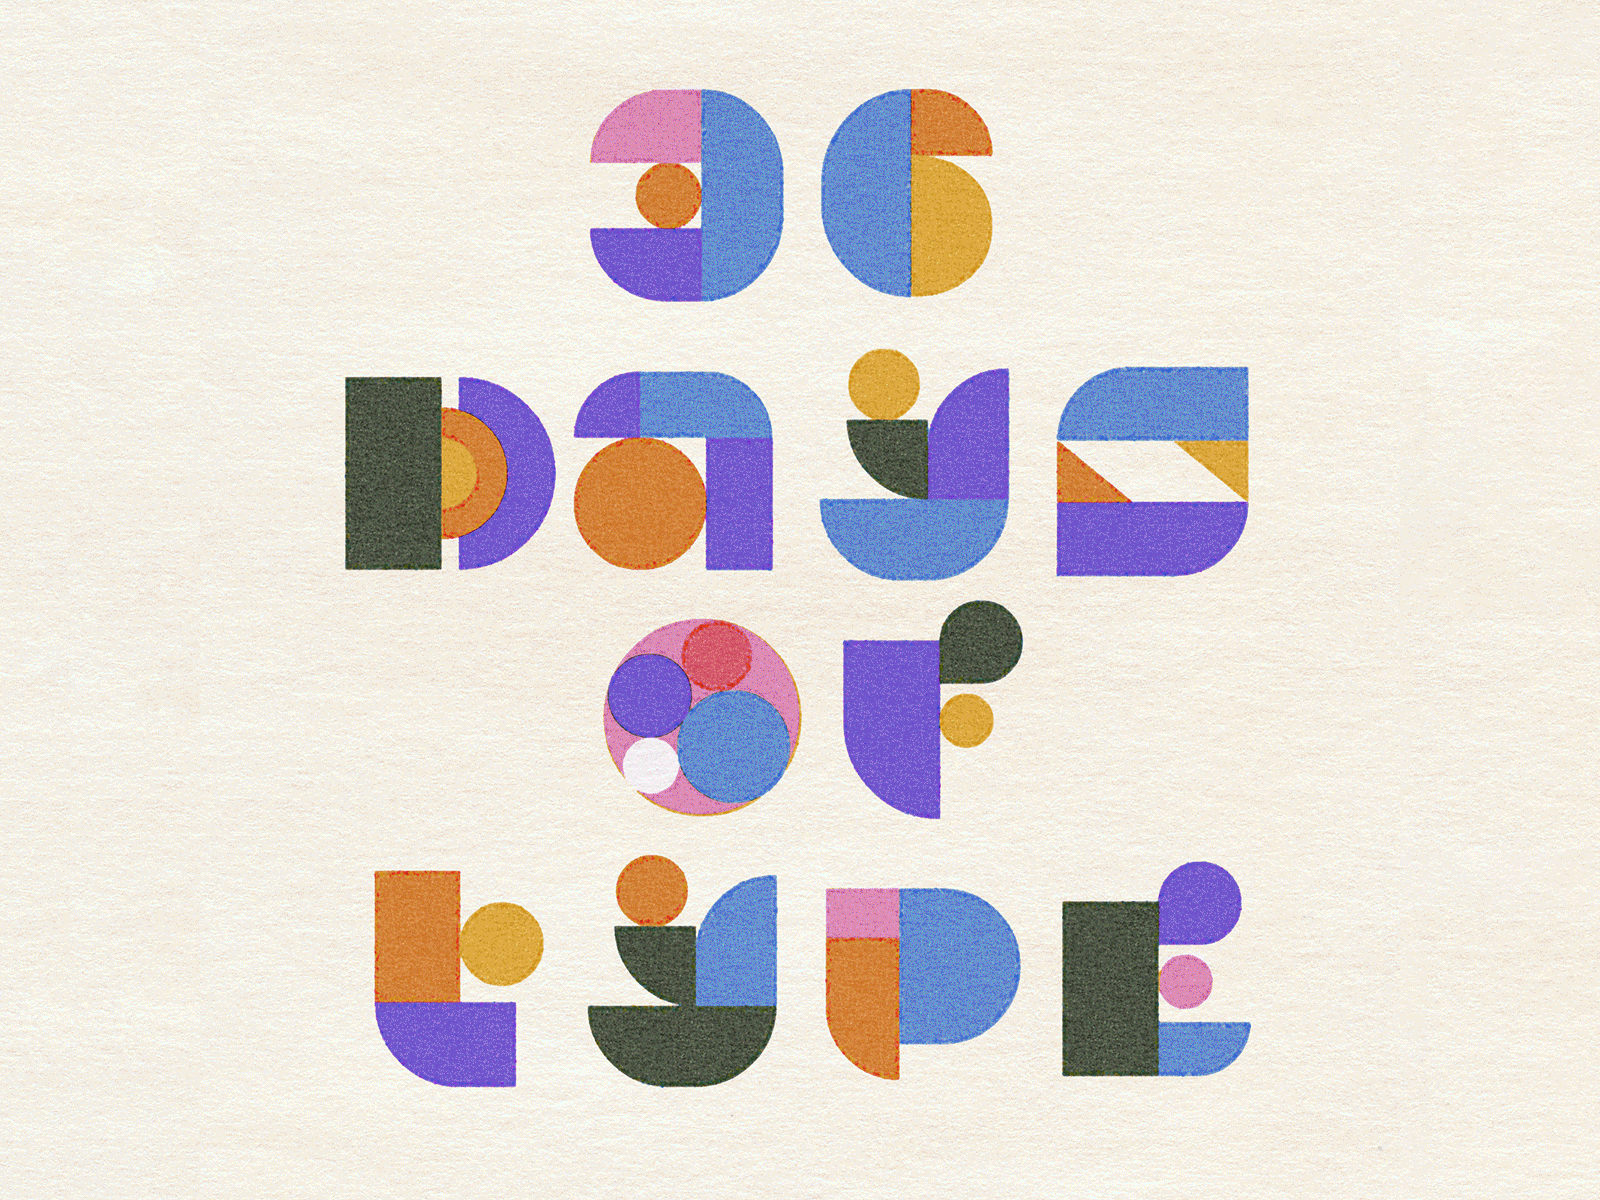 36 Days of Type 36daysoftype 36daysoftype07 color design shapes type typography